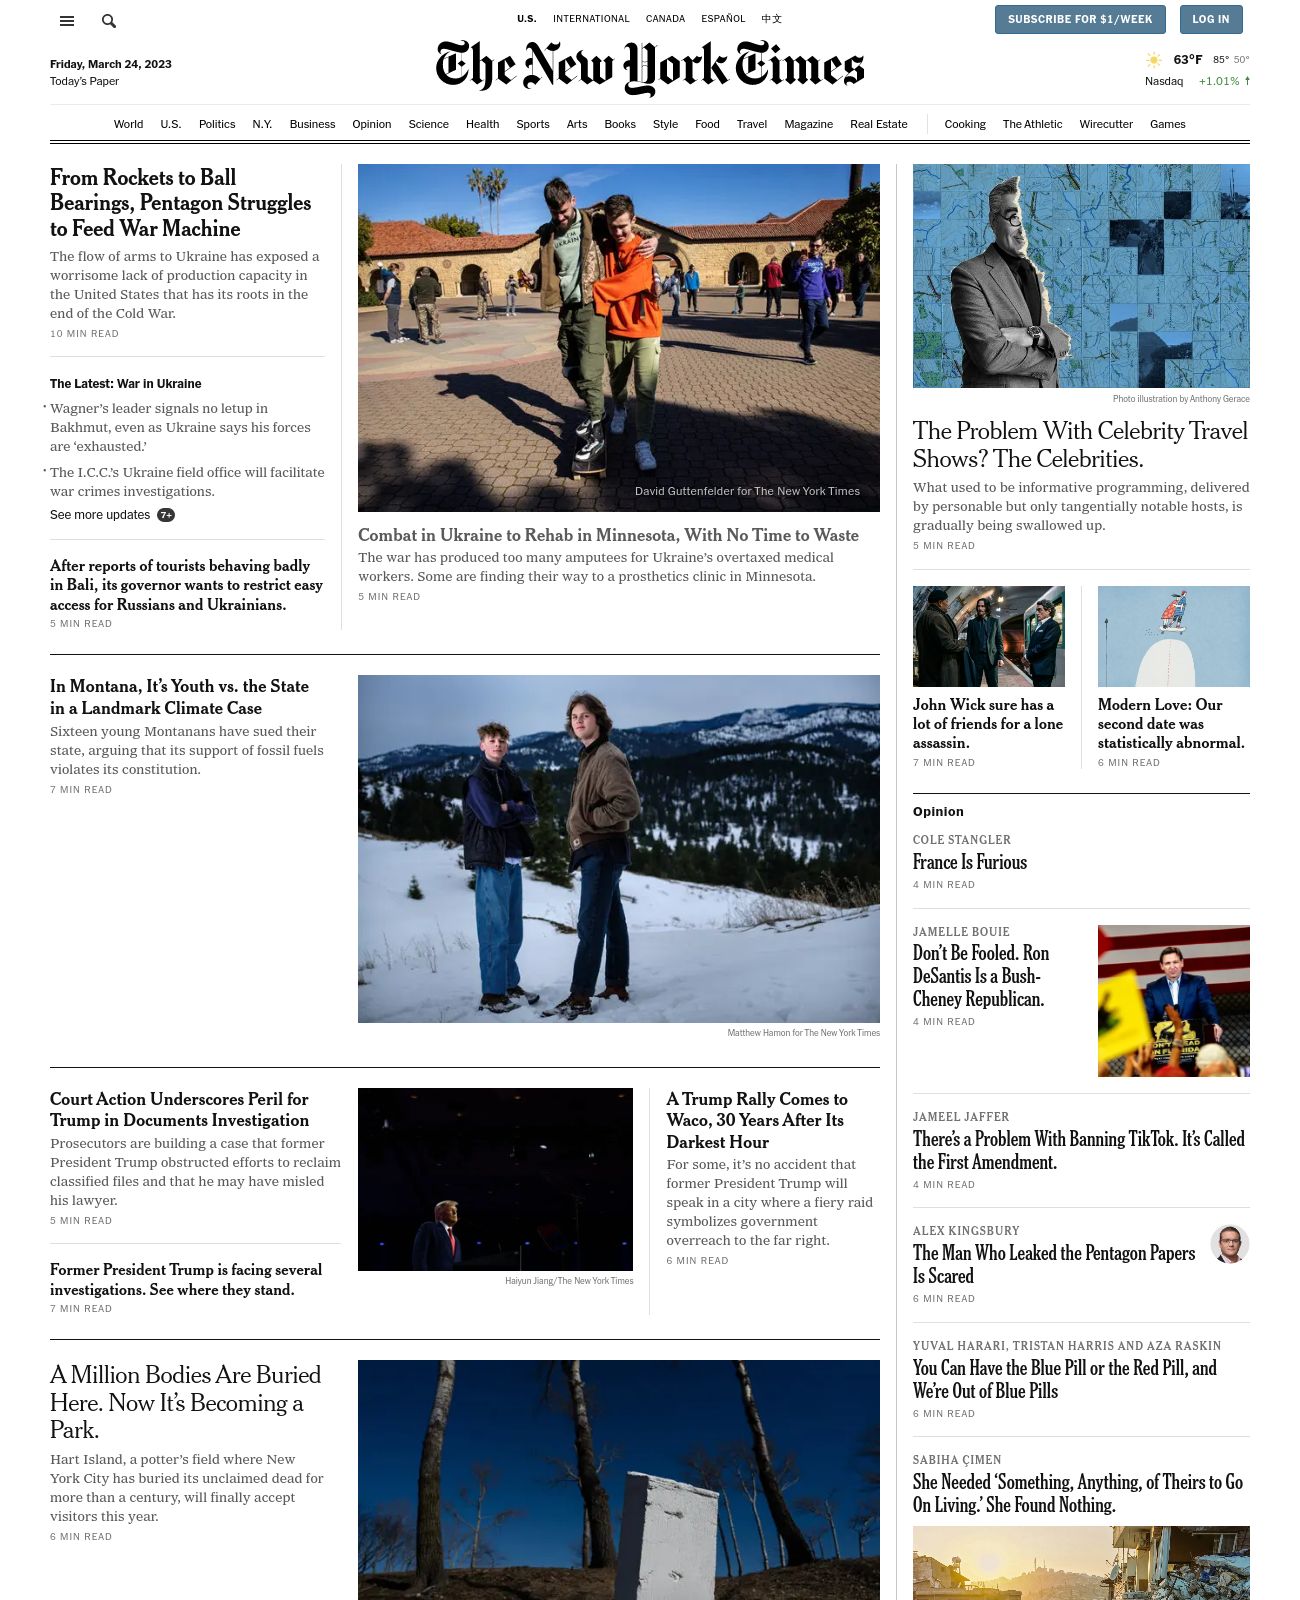 New York Times at 2023-03-24 08:35:51-04:00 local time